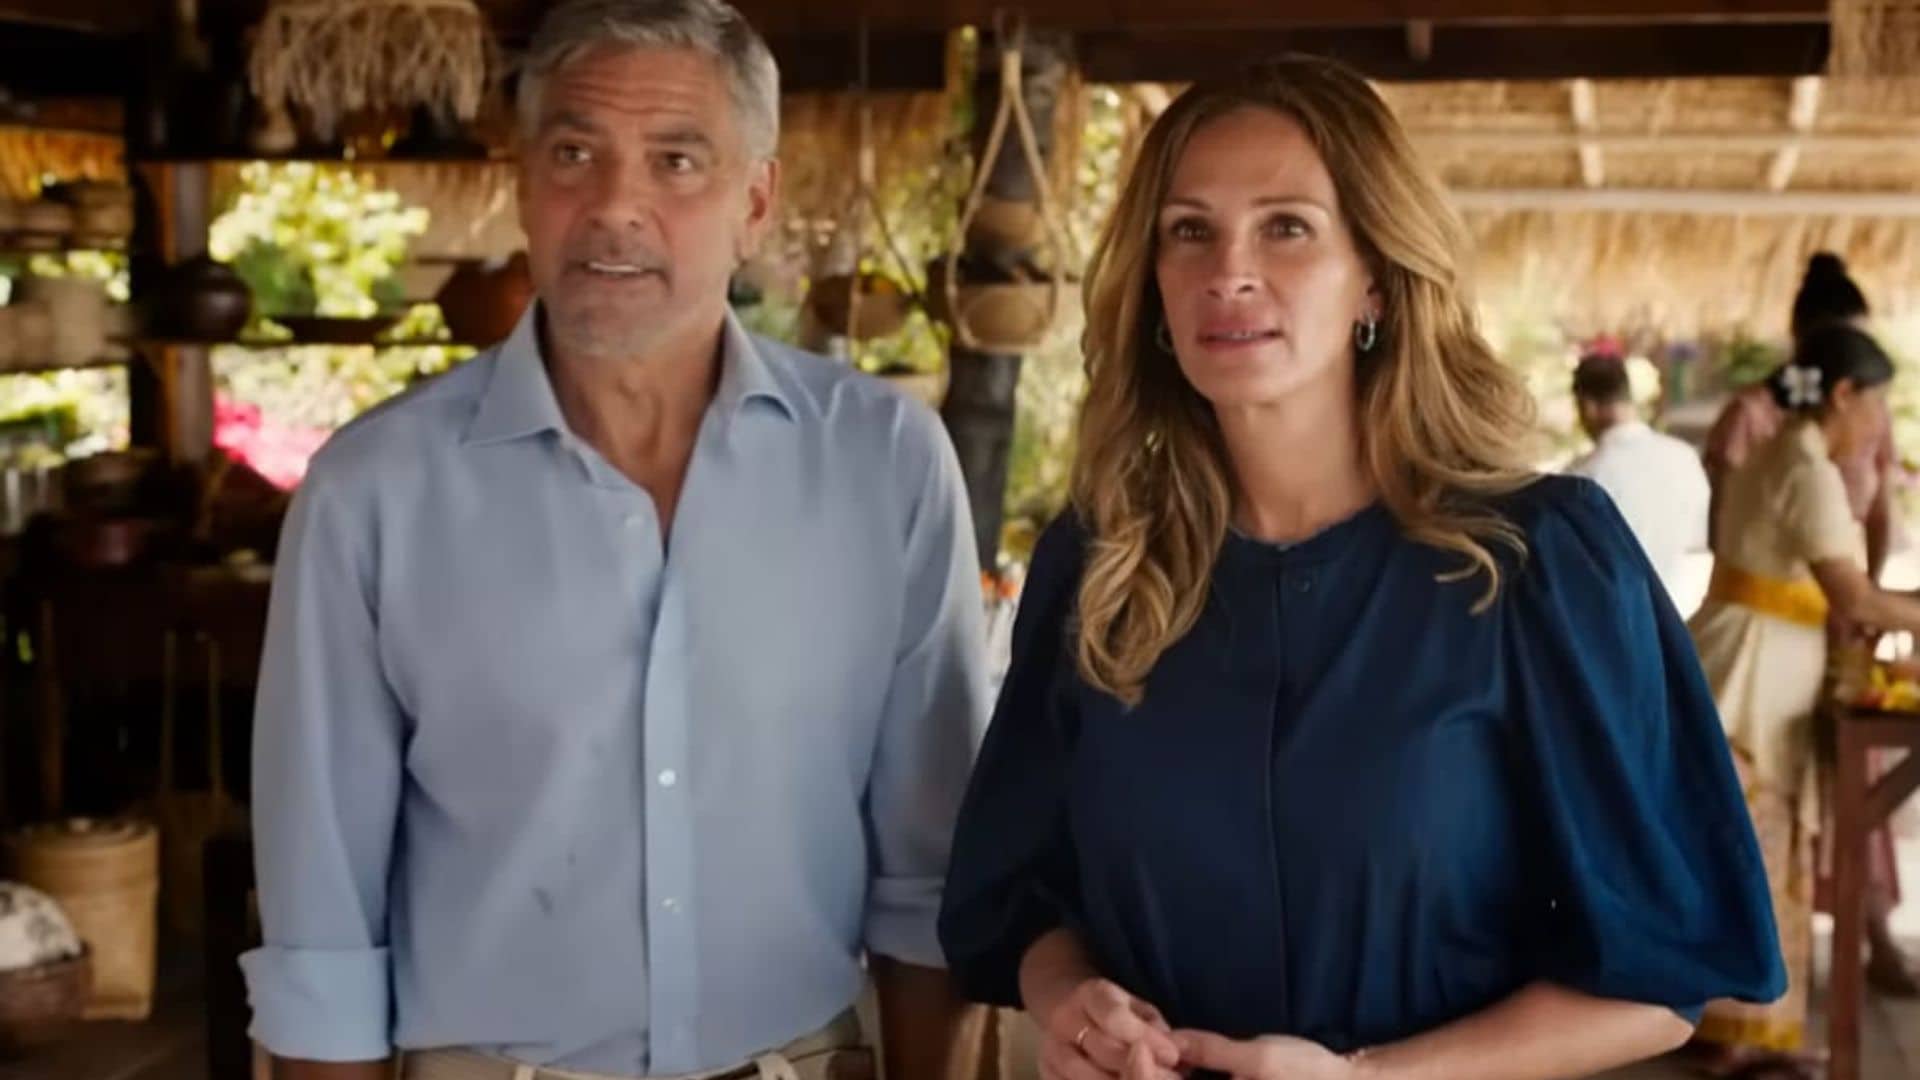 Watch Julia Roberts & George Clooney fall in love in ‘Ticket to Paradise’